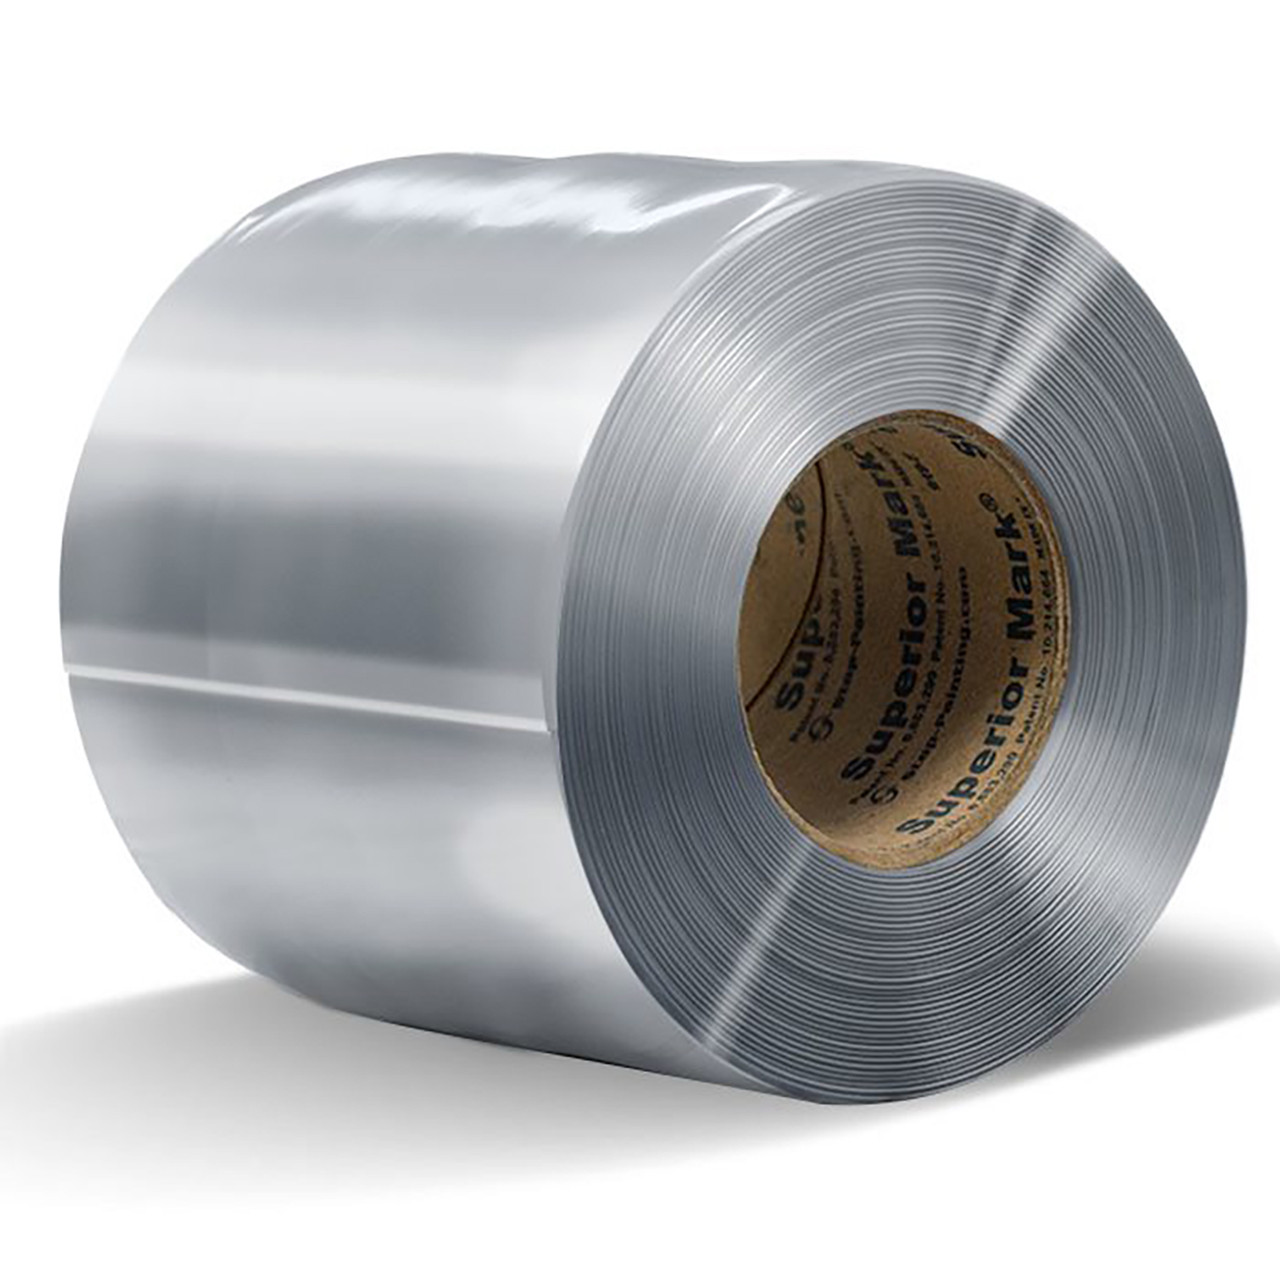 Superior Mark - The Best Floor Tape Available